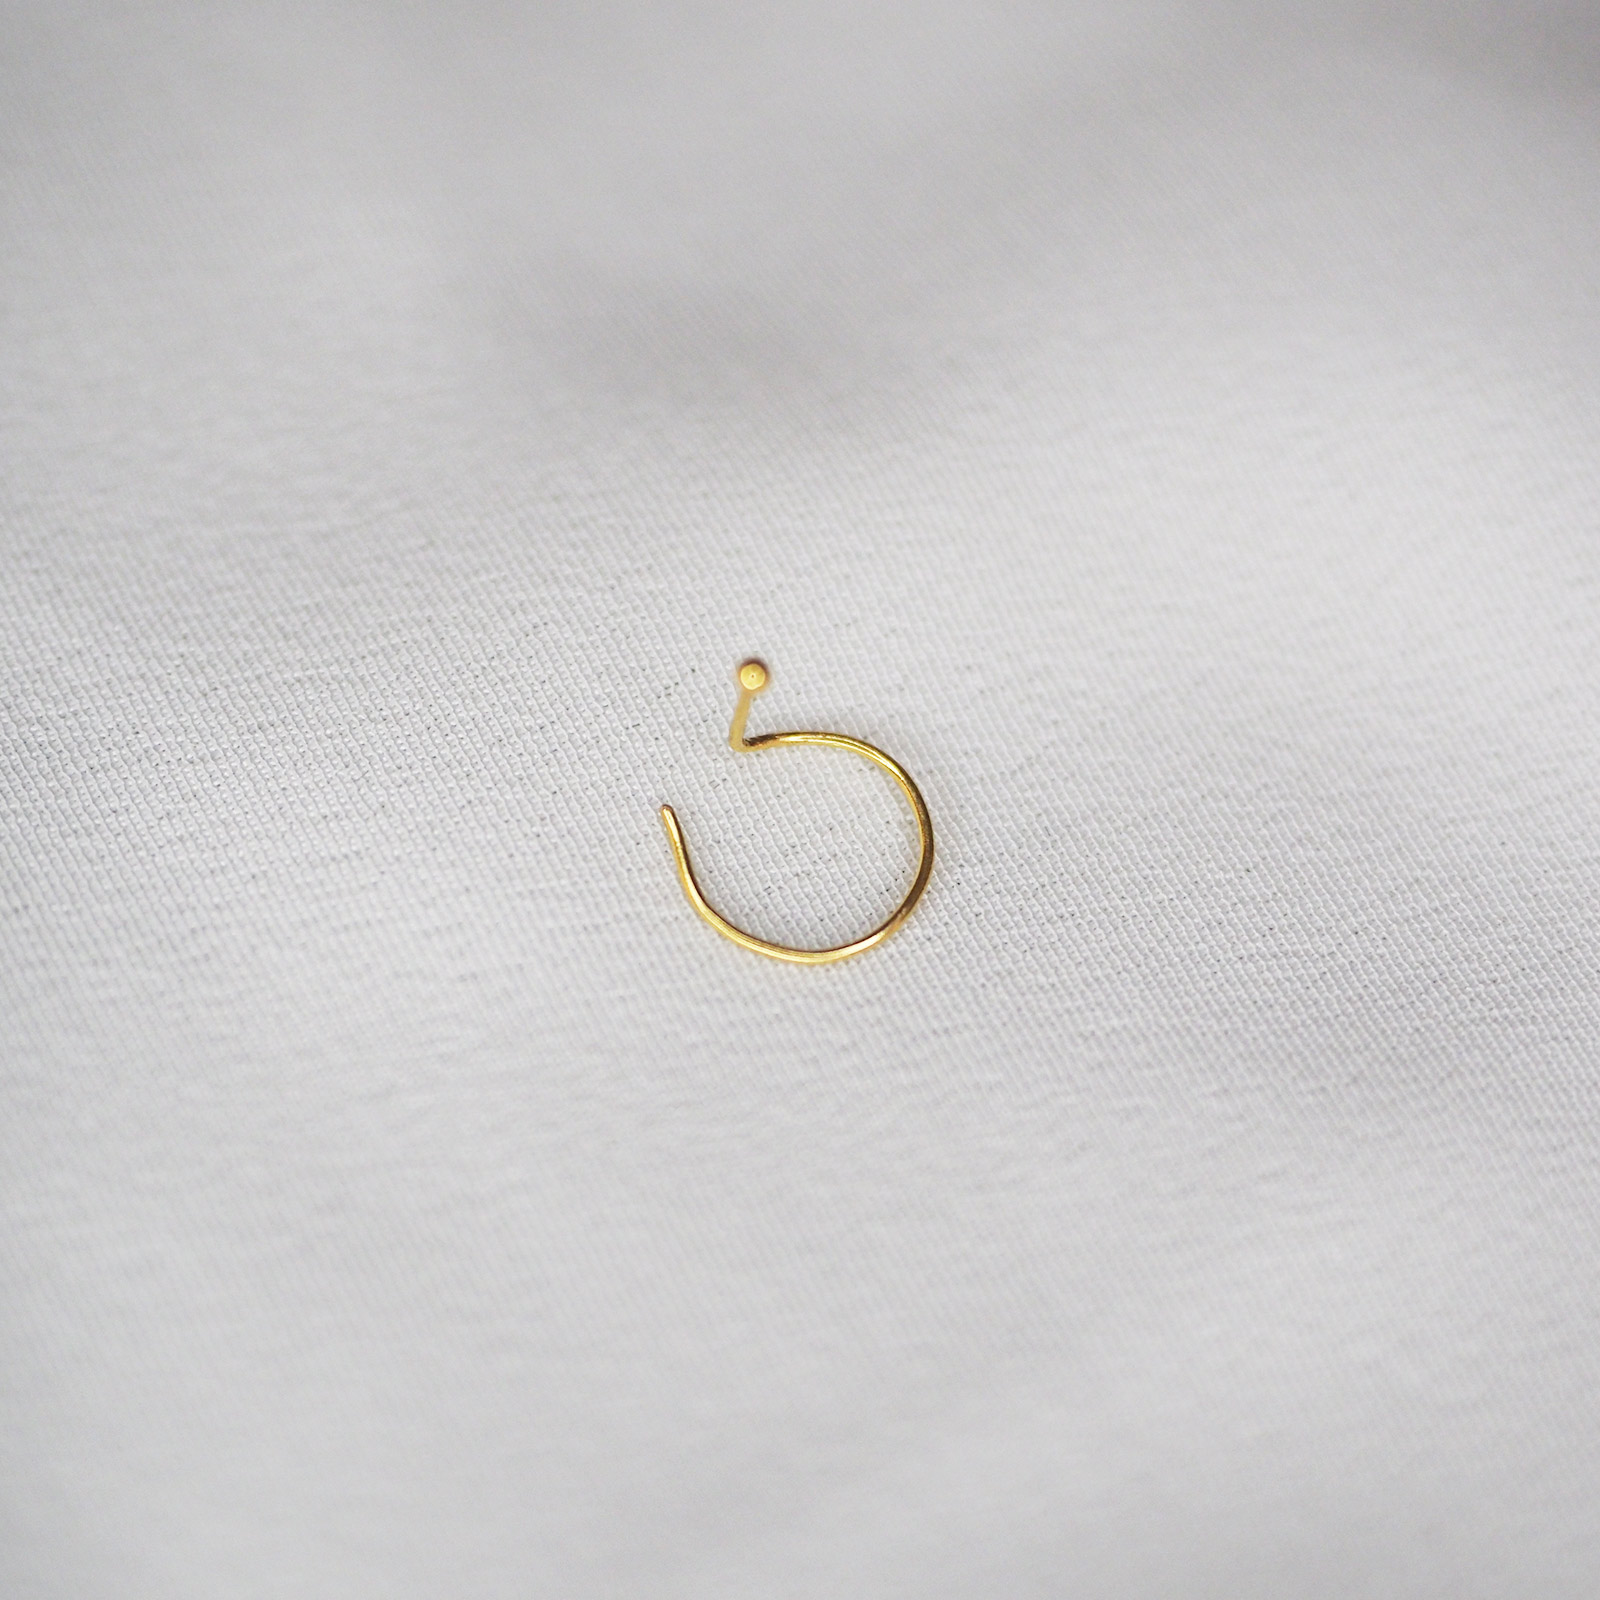 Did I make the right choice picking a gold nose ring over silver? : r/ piercing-saigonsouth.com.vn